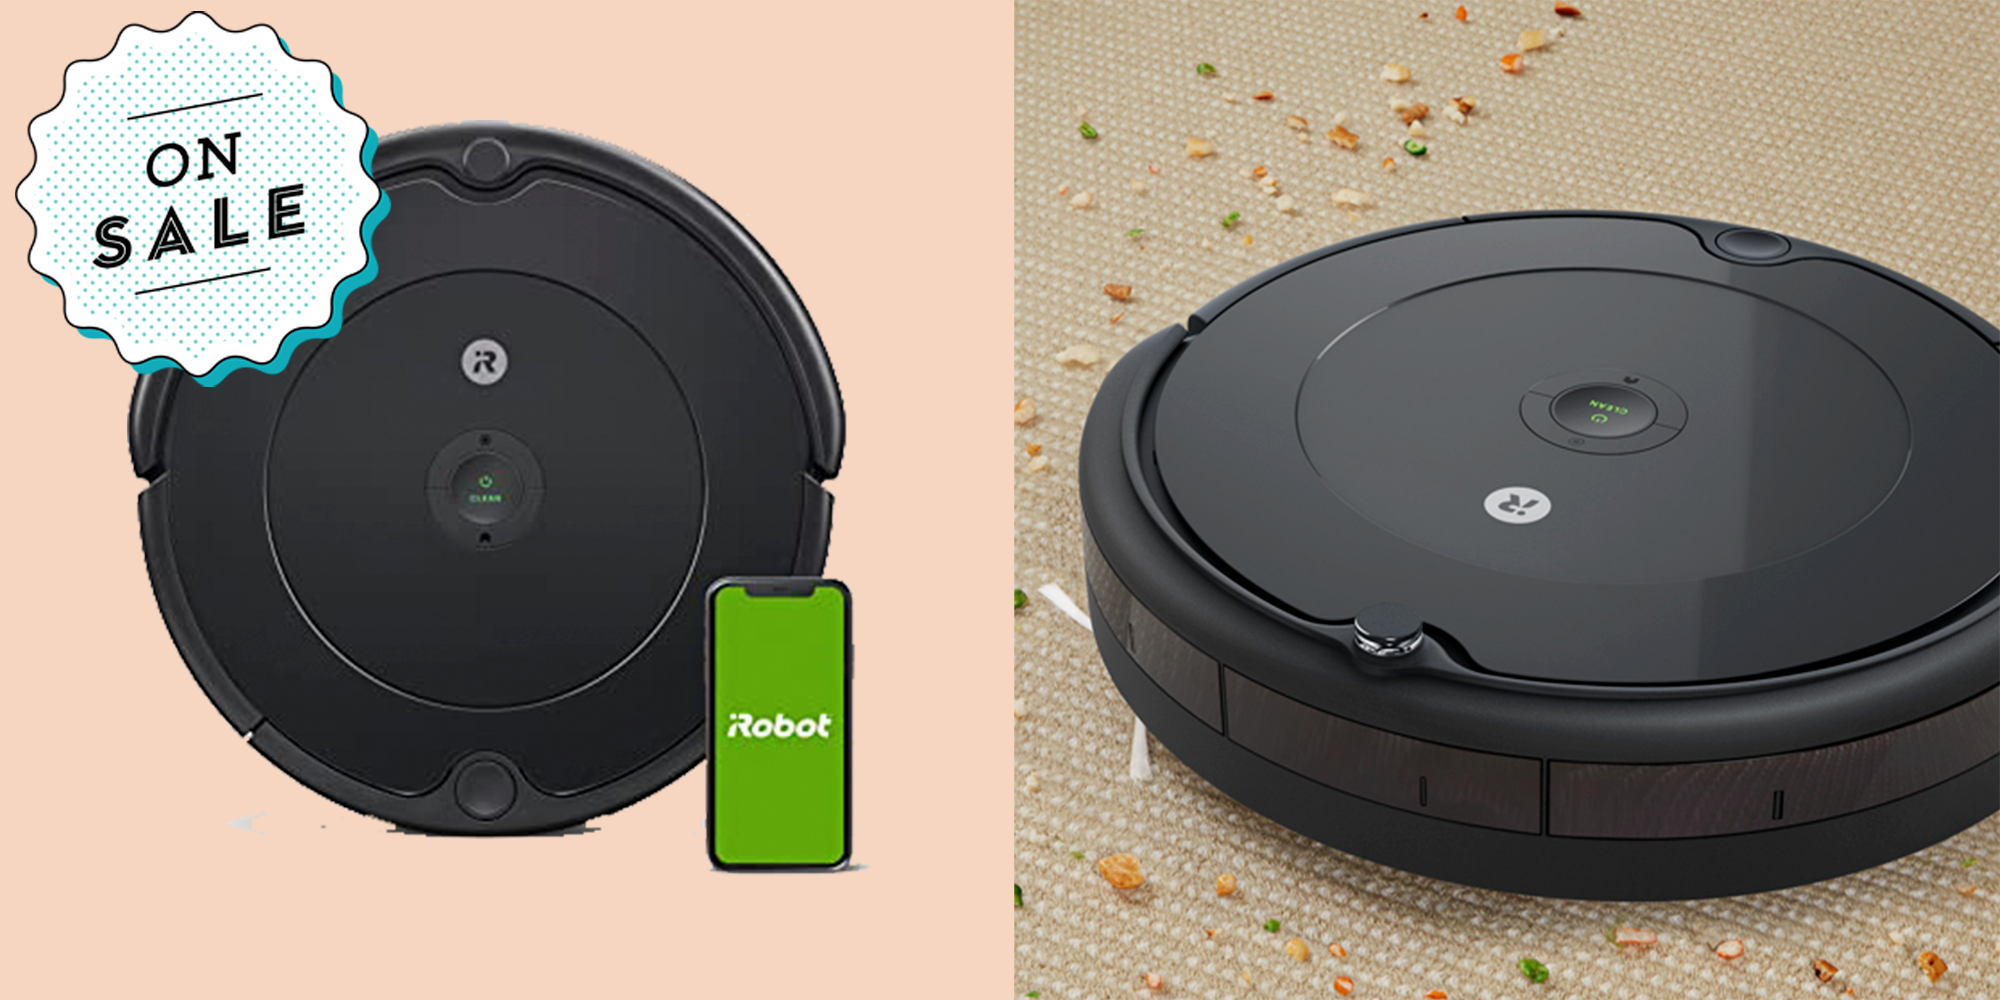 Amazon Deal Alert: Get the iRobot Roomba for $95 Off This Week